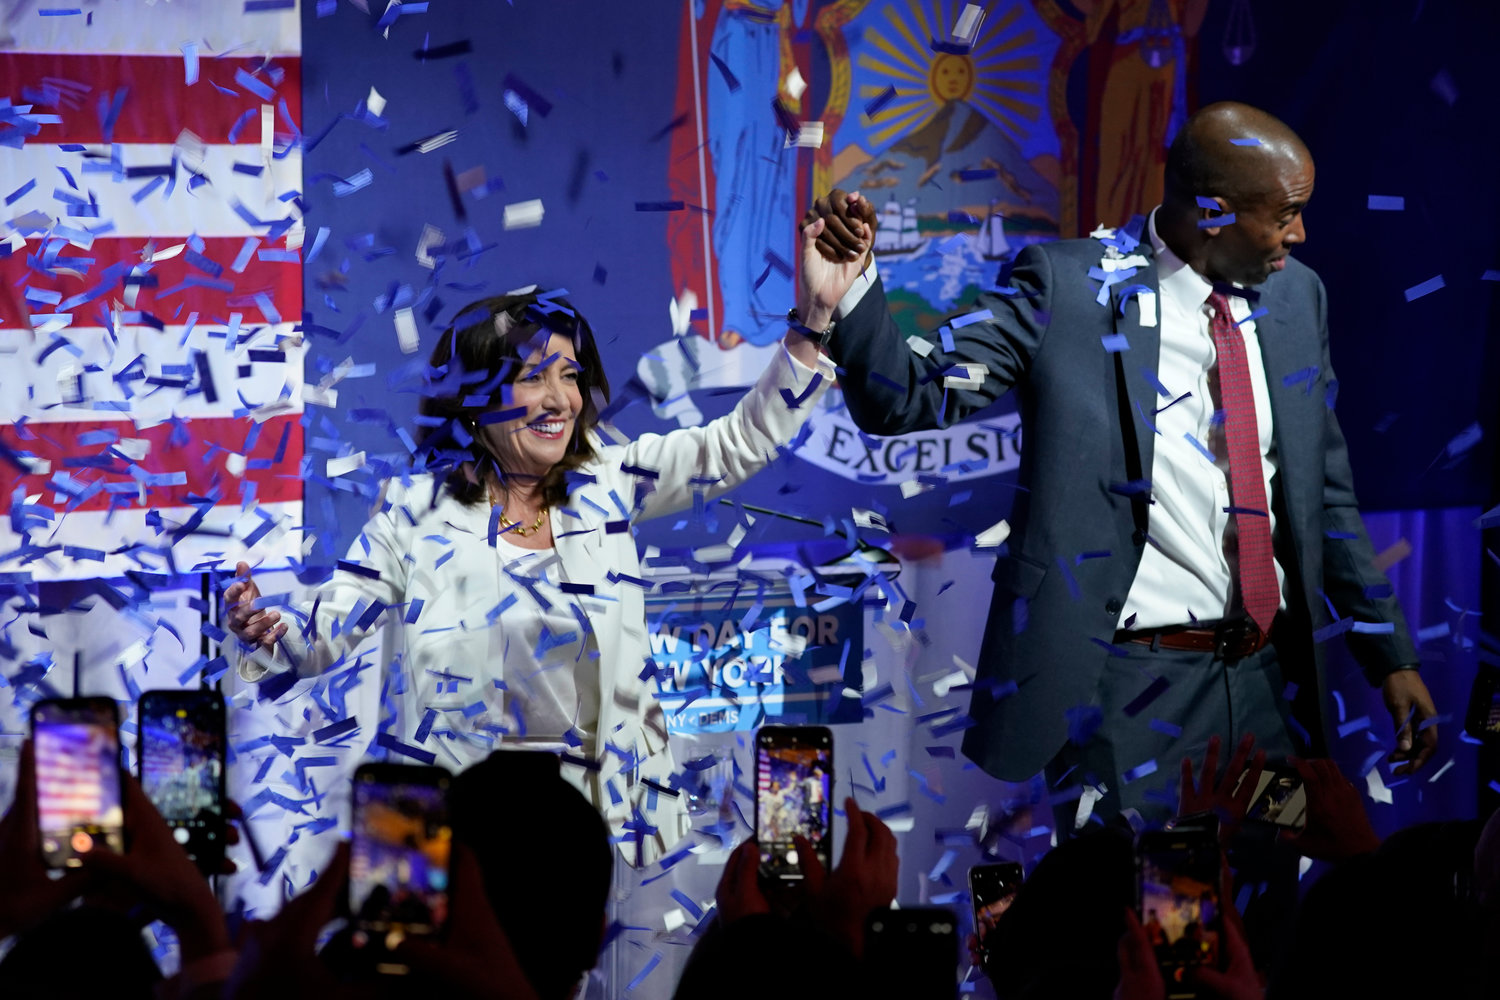 New York Gov. Kathy Hochul stands with Lieutenant governor Antonio Delgado during their primary election night party, Tuesday, June 28, 2022, in New York. (AP Photo/Mary Altaffer)